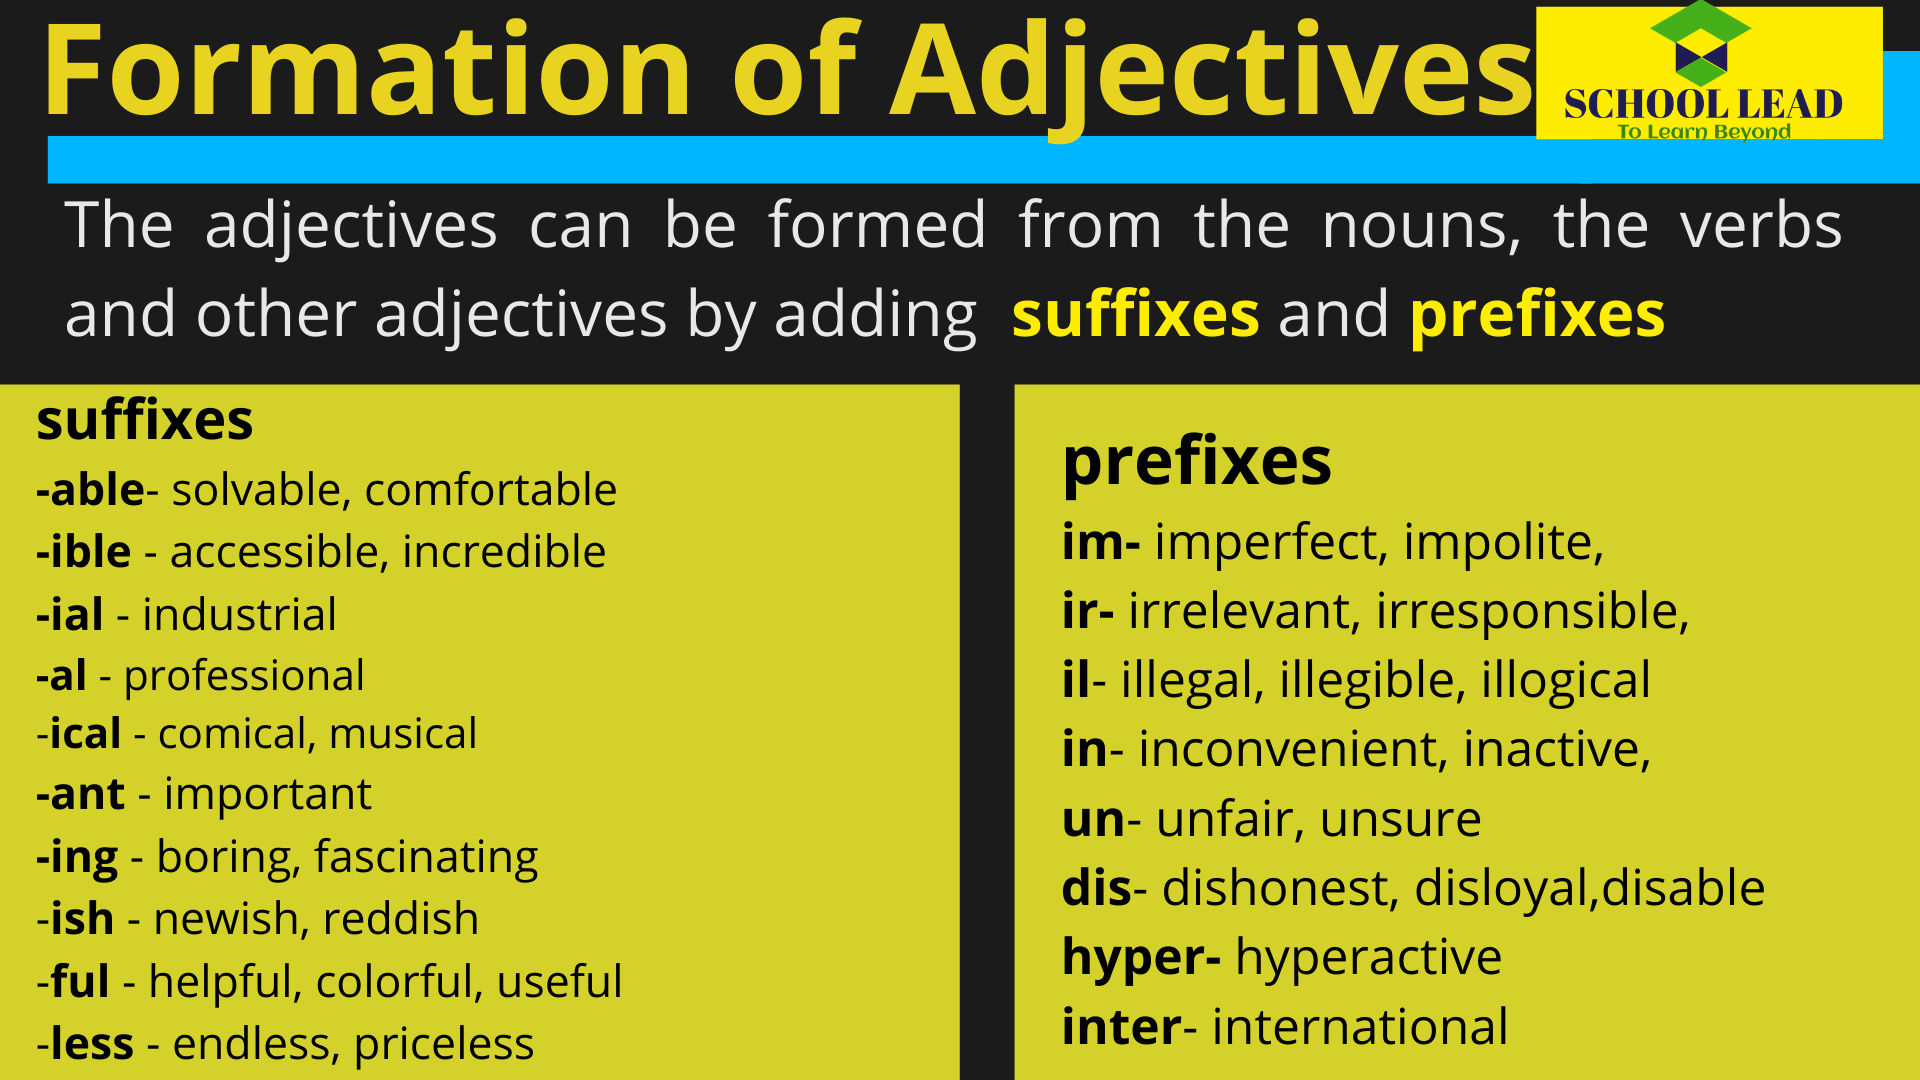 Adjective formation. Forming adjectives. Formal adjectives.